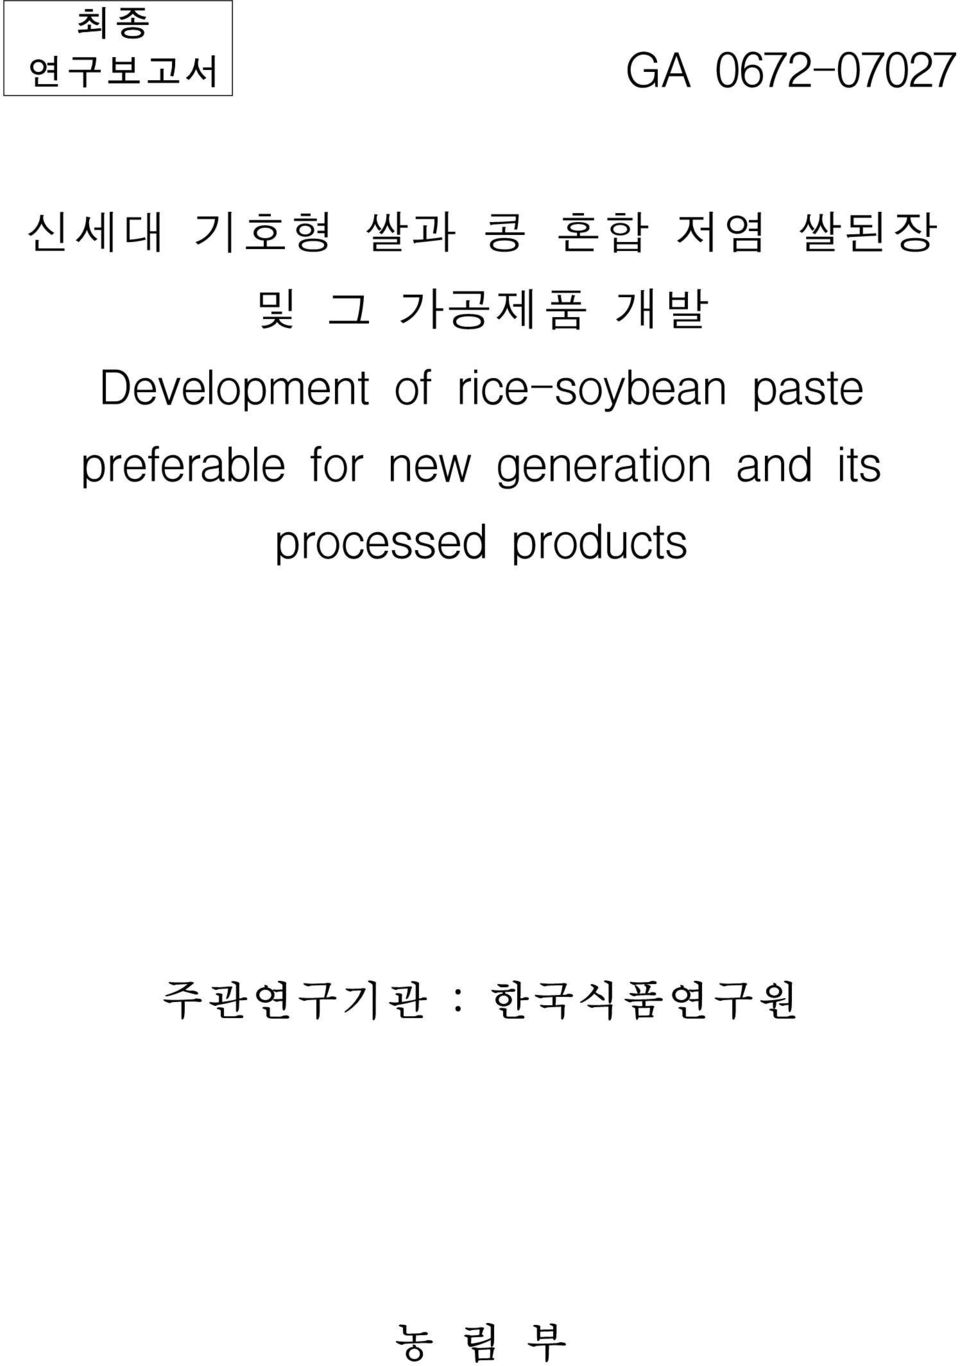 rice-soybean paste preferable for new